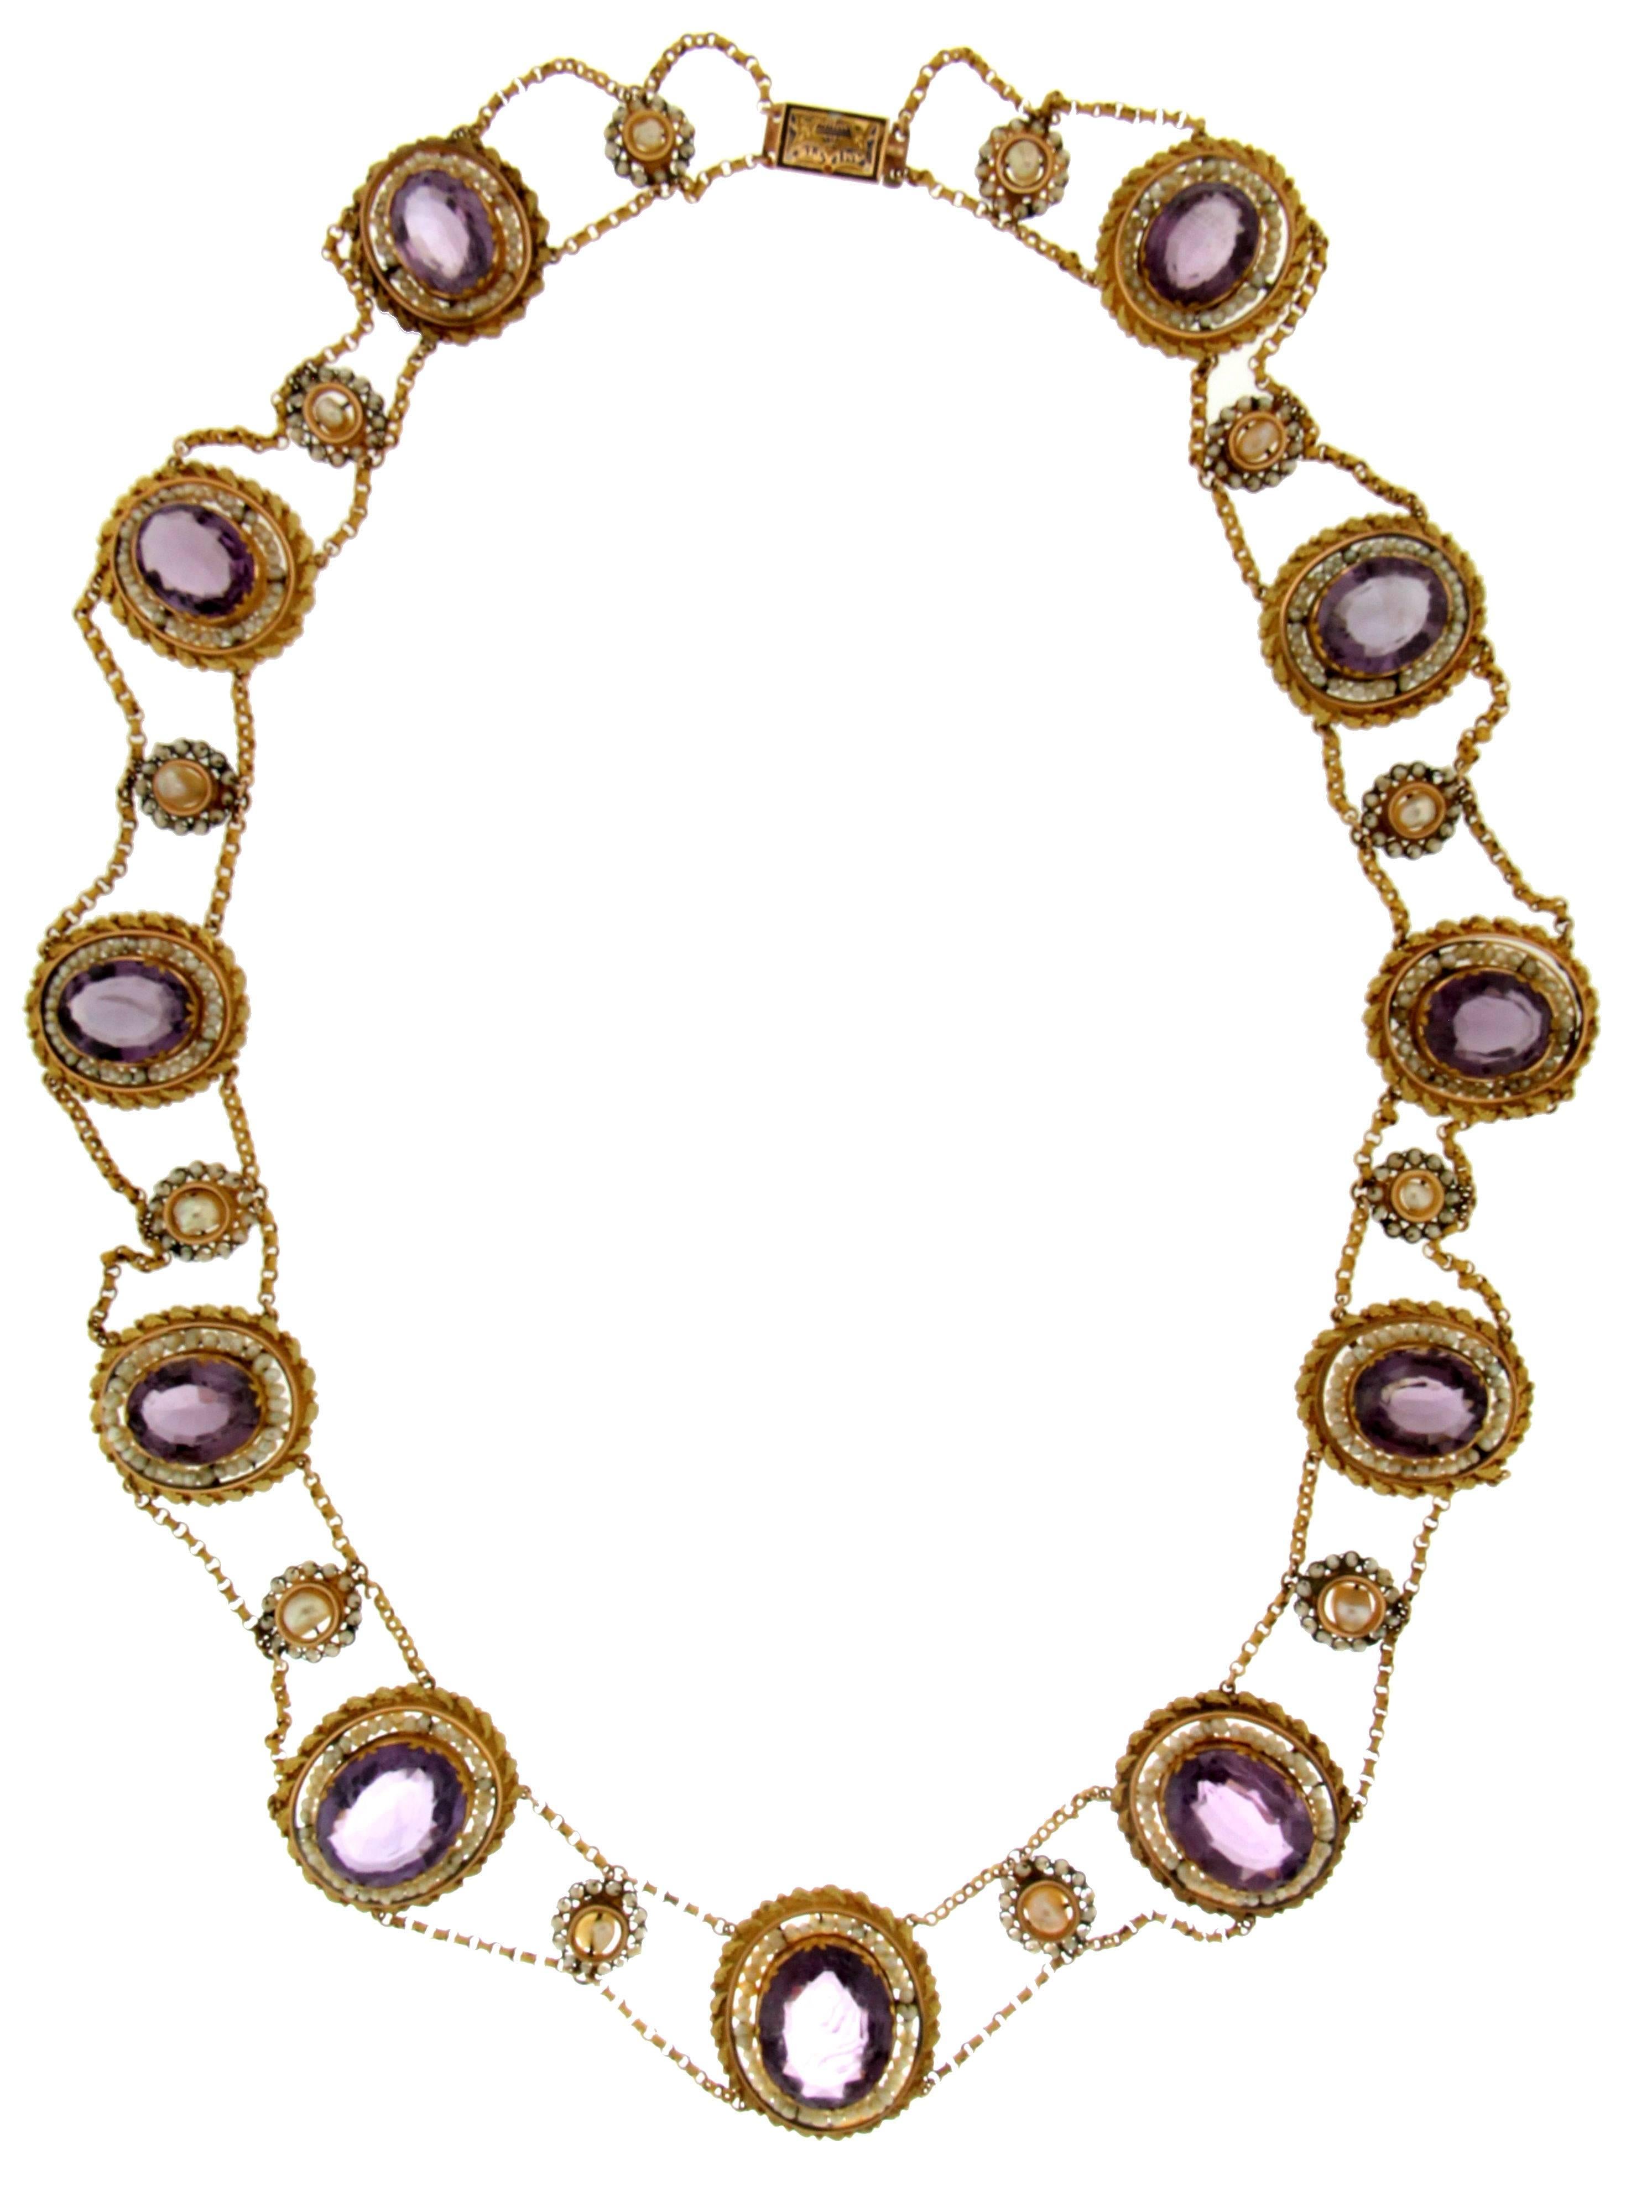 Gold 14 Carat Amethyst and Pearls Choker Necklace Set, There are Brooch And Earrings

Necklace Weight 65.30 grams 
Necklace 50 cm
Brooch Weight 8.40 grams
Brooch width 3.20 cm length 2.90 cm
Earrings Weight 9.30 grams
Earrings length 4.10 cm

